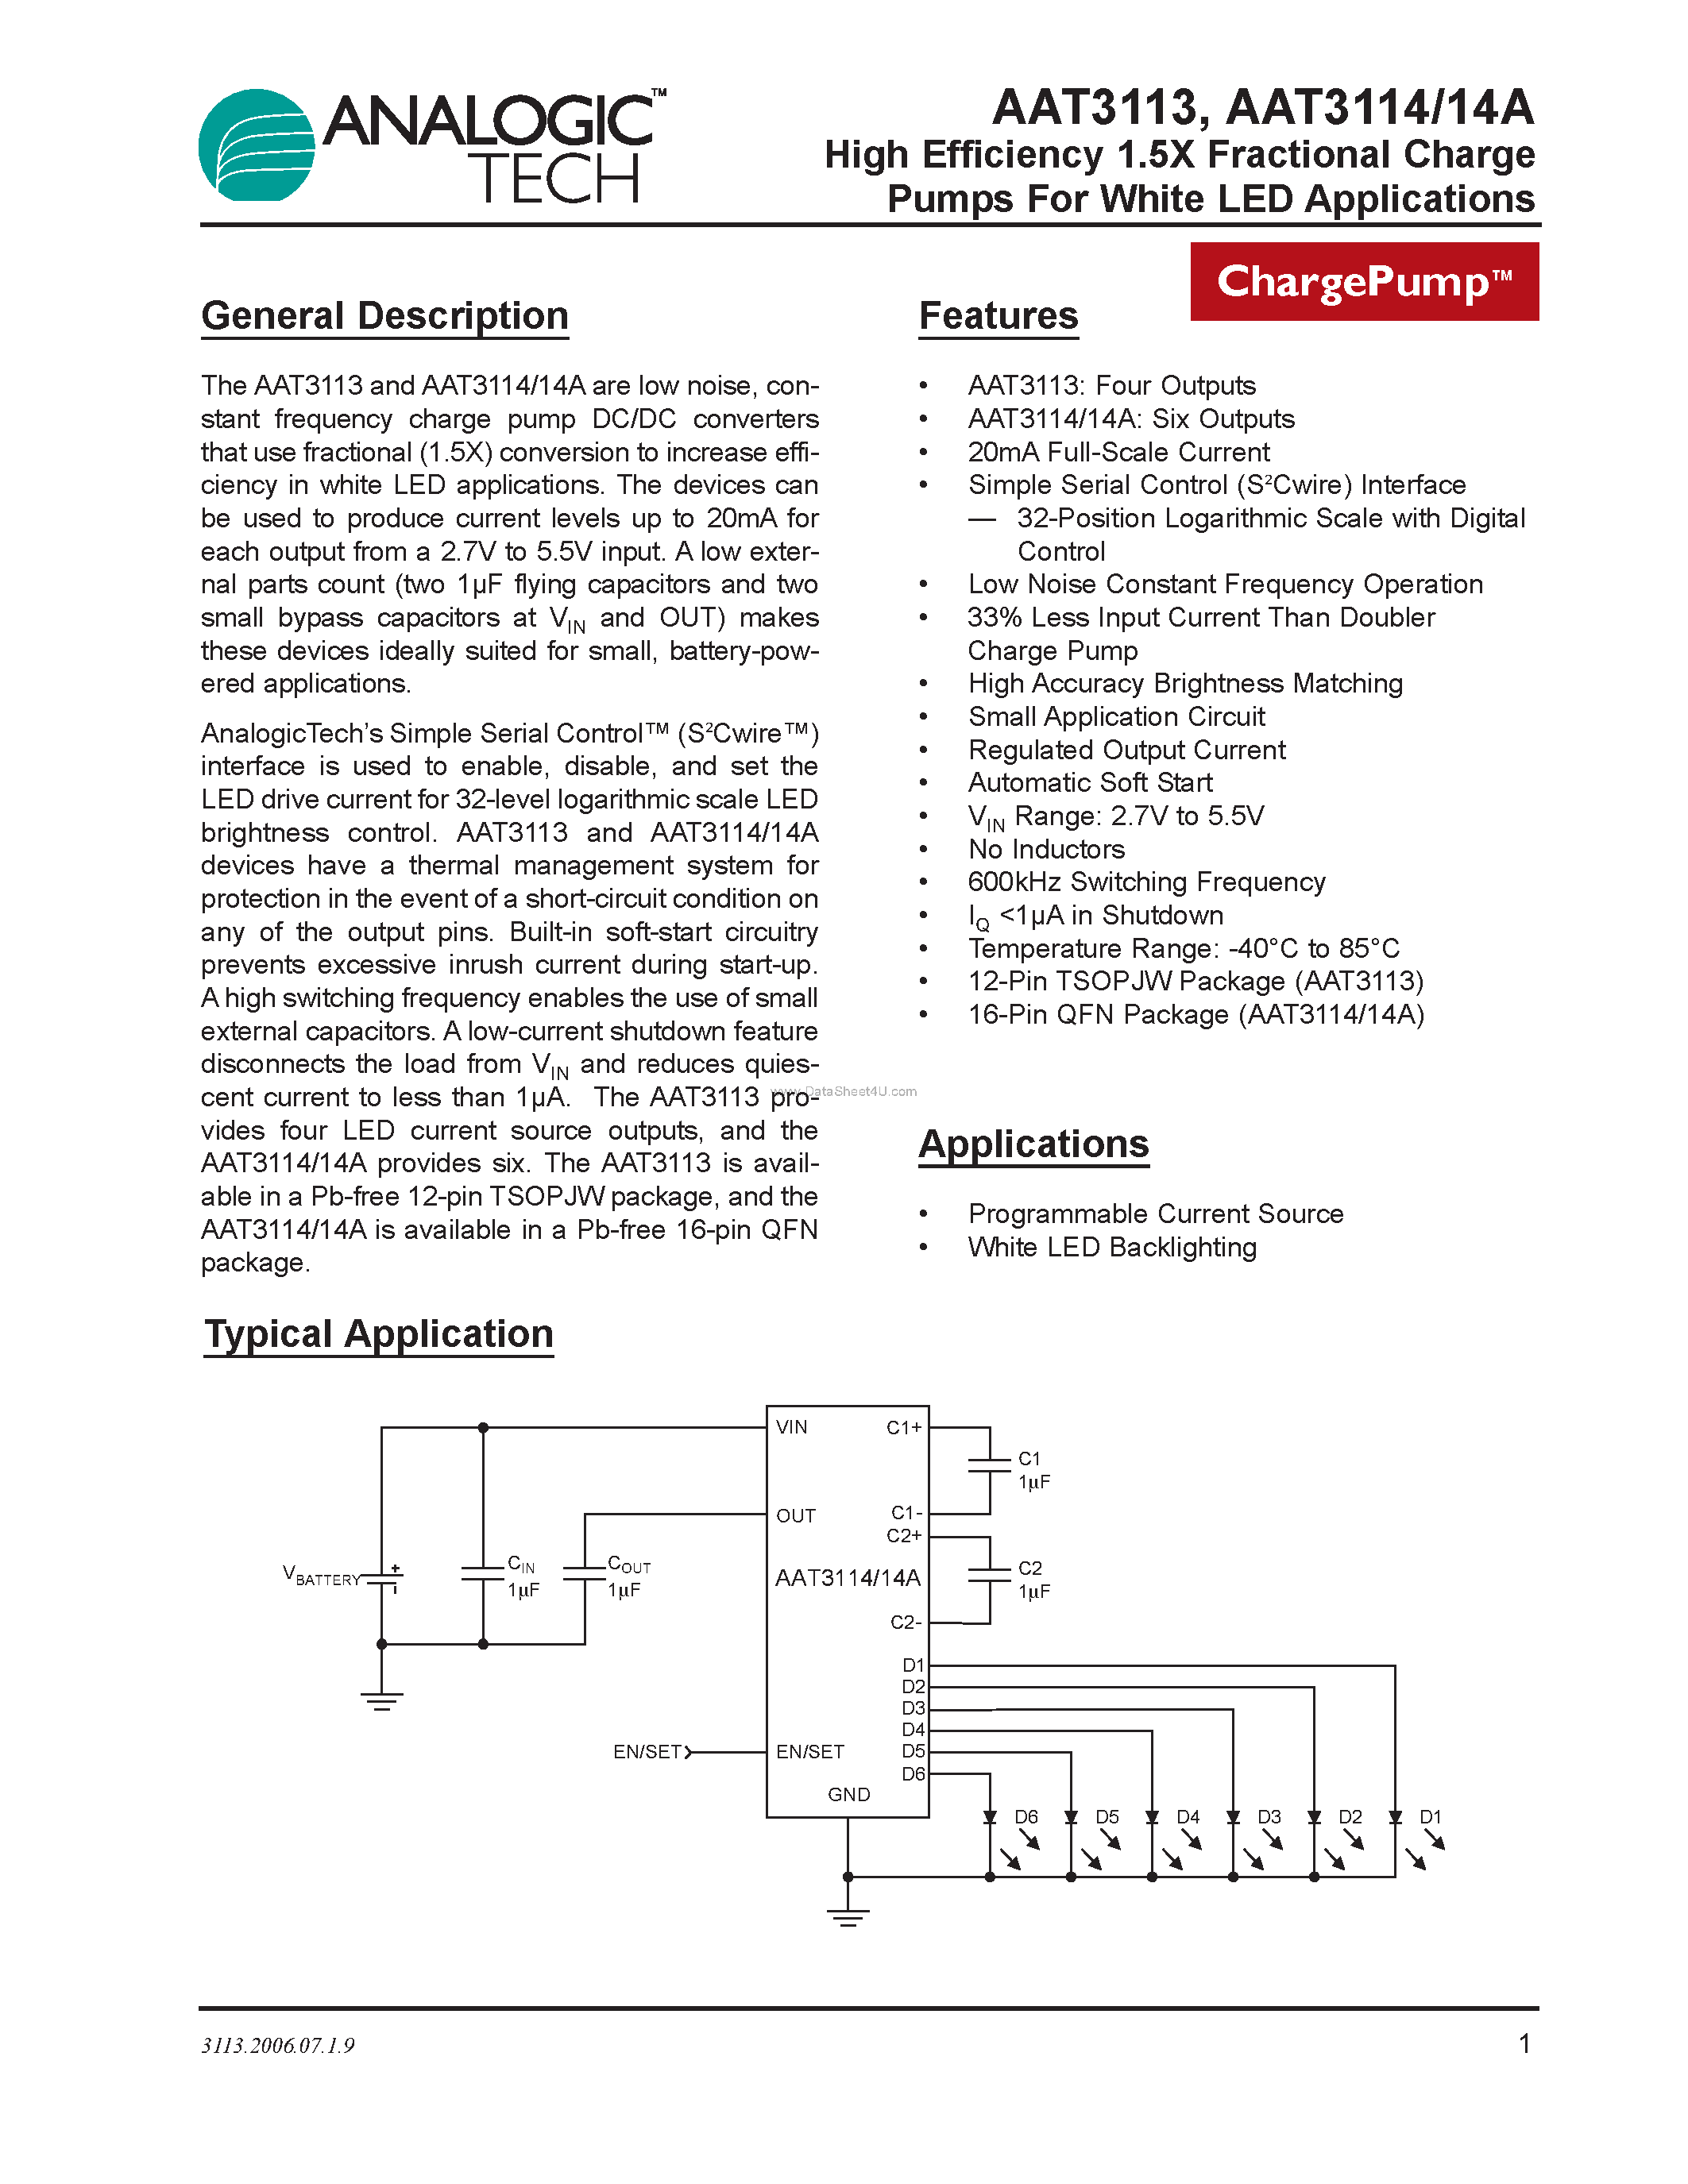 Datasheet AAT3114 - High Efficiency 1.5X Fractional Charge Pumps page 1